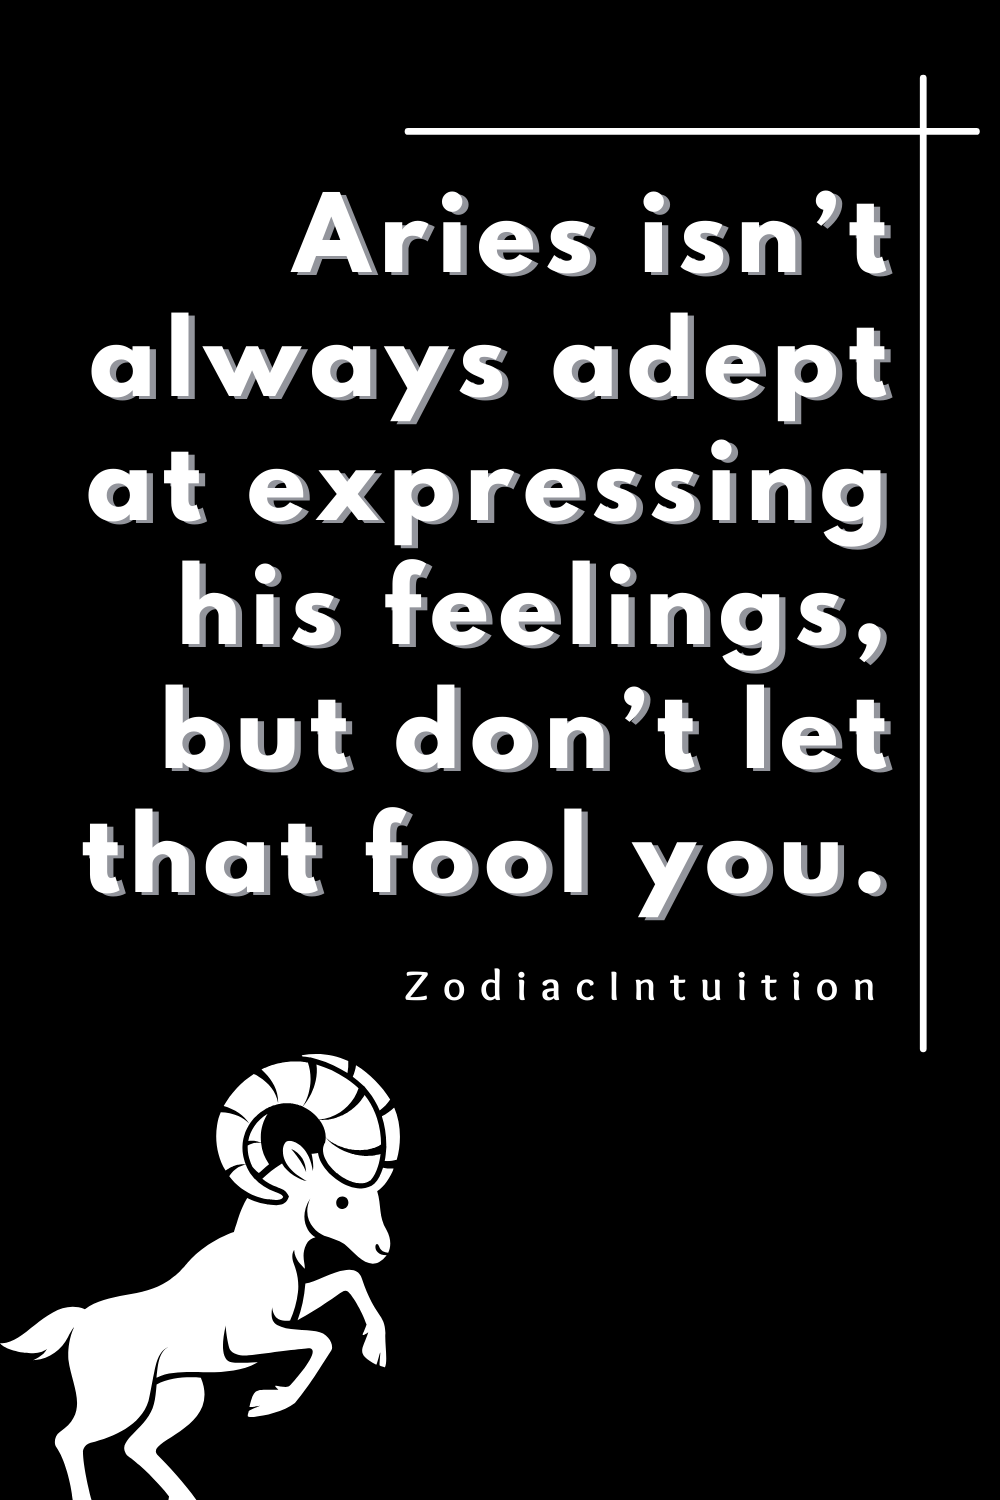 Aries isn’t always adept at expressing his feelings, but don’t let that fool you.